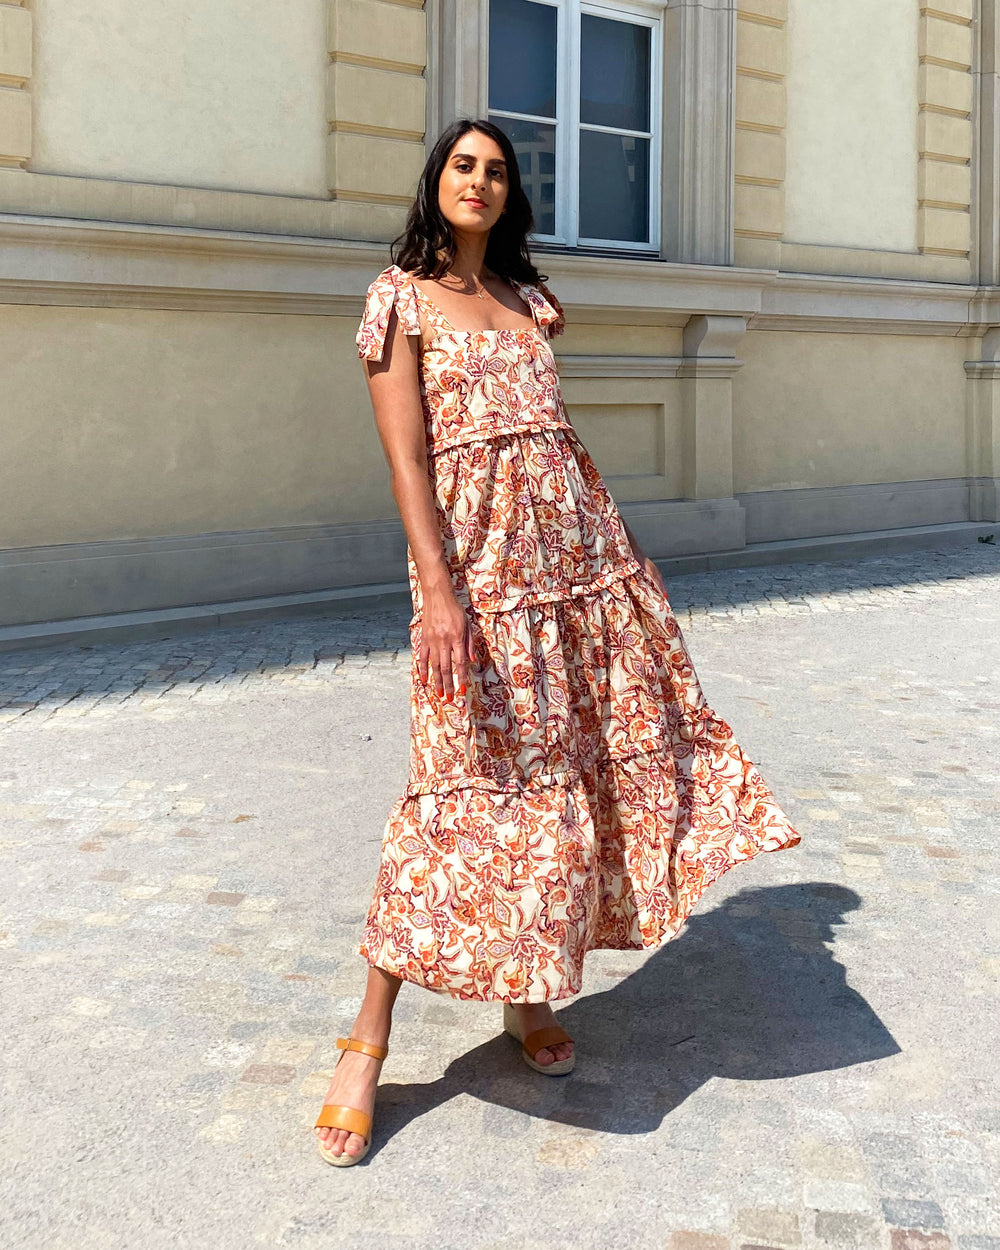 Woman wearing the Raman Dress sewing pattern from Tammy Handmade on The Fold Line. A slip-on dress pattern made in cotton, satin, cotton poplin, rayon/viscose, crepe or chiffon fabric, featuring long tie shoulder straps, square neckline, three-tiered skir